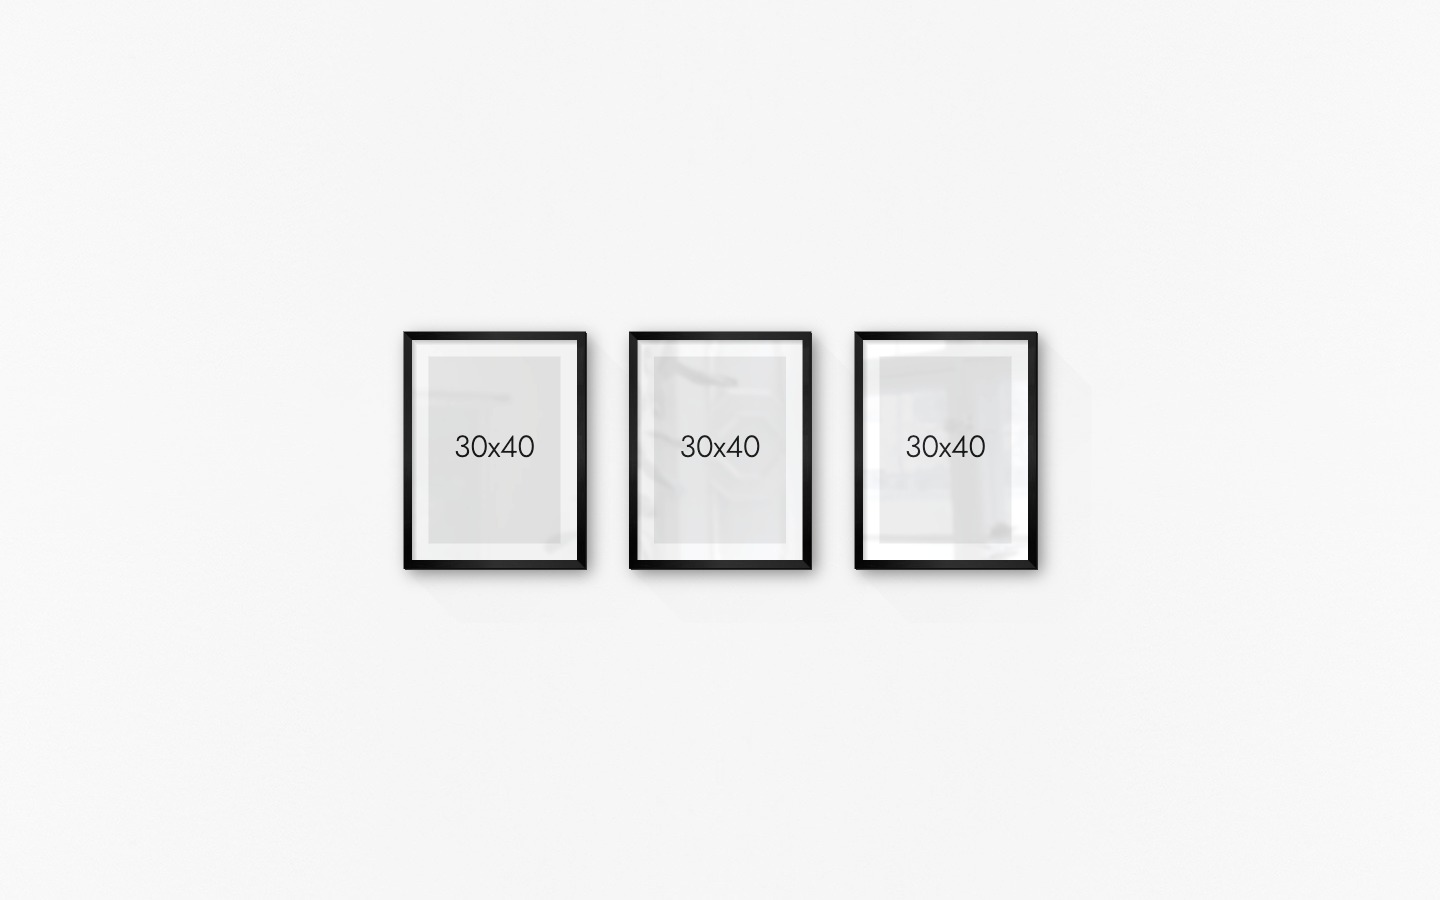 Gallery wall with picture frames in black in sizes 30x40